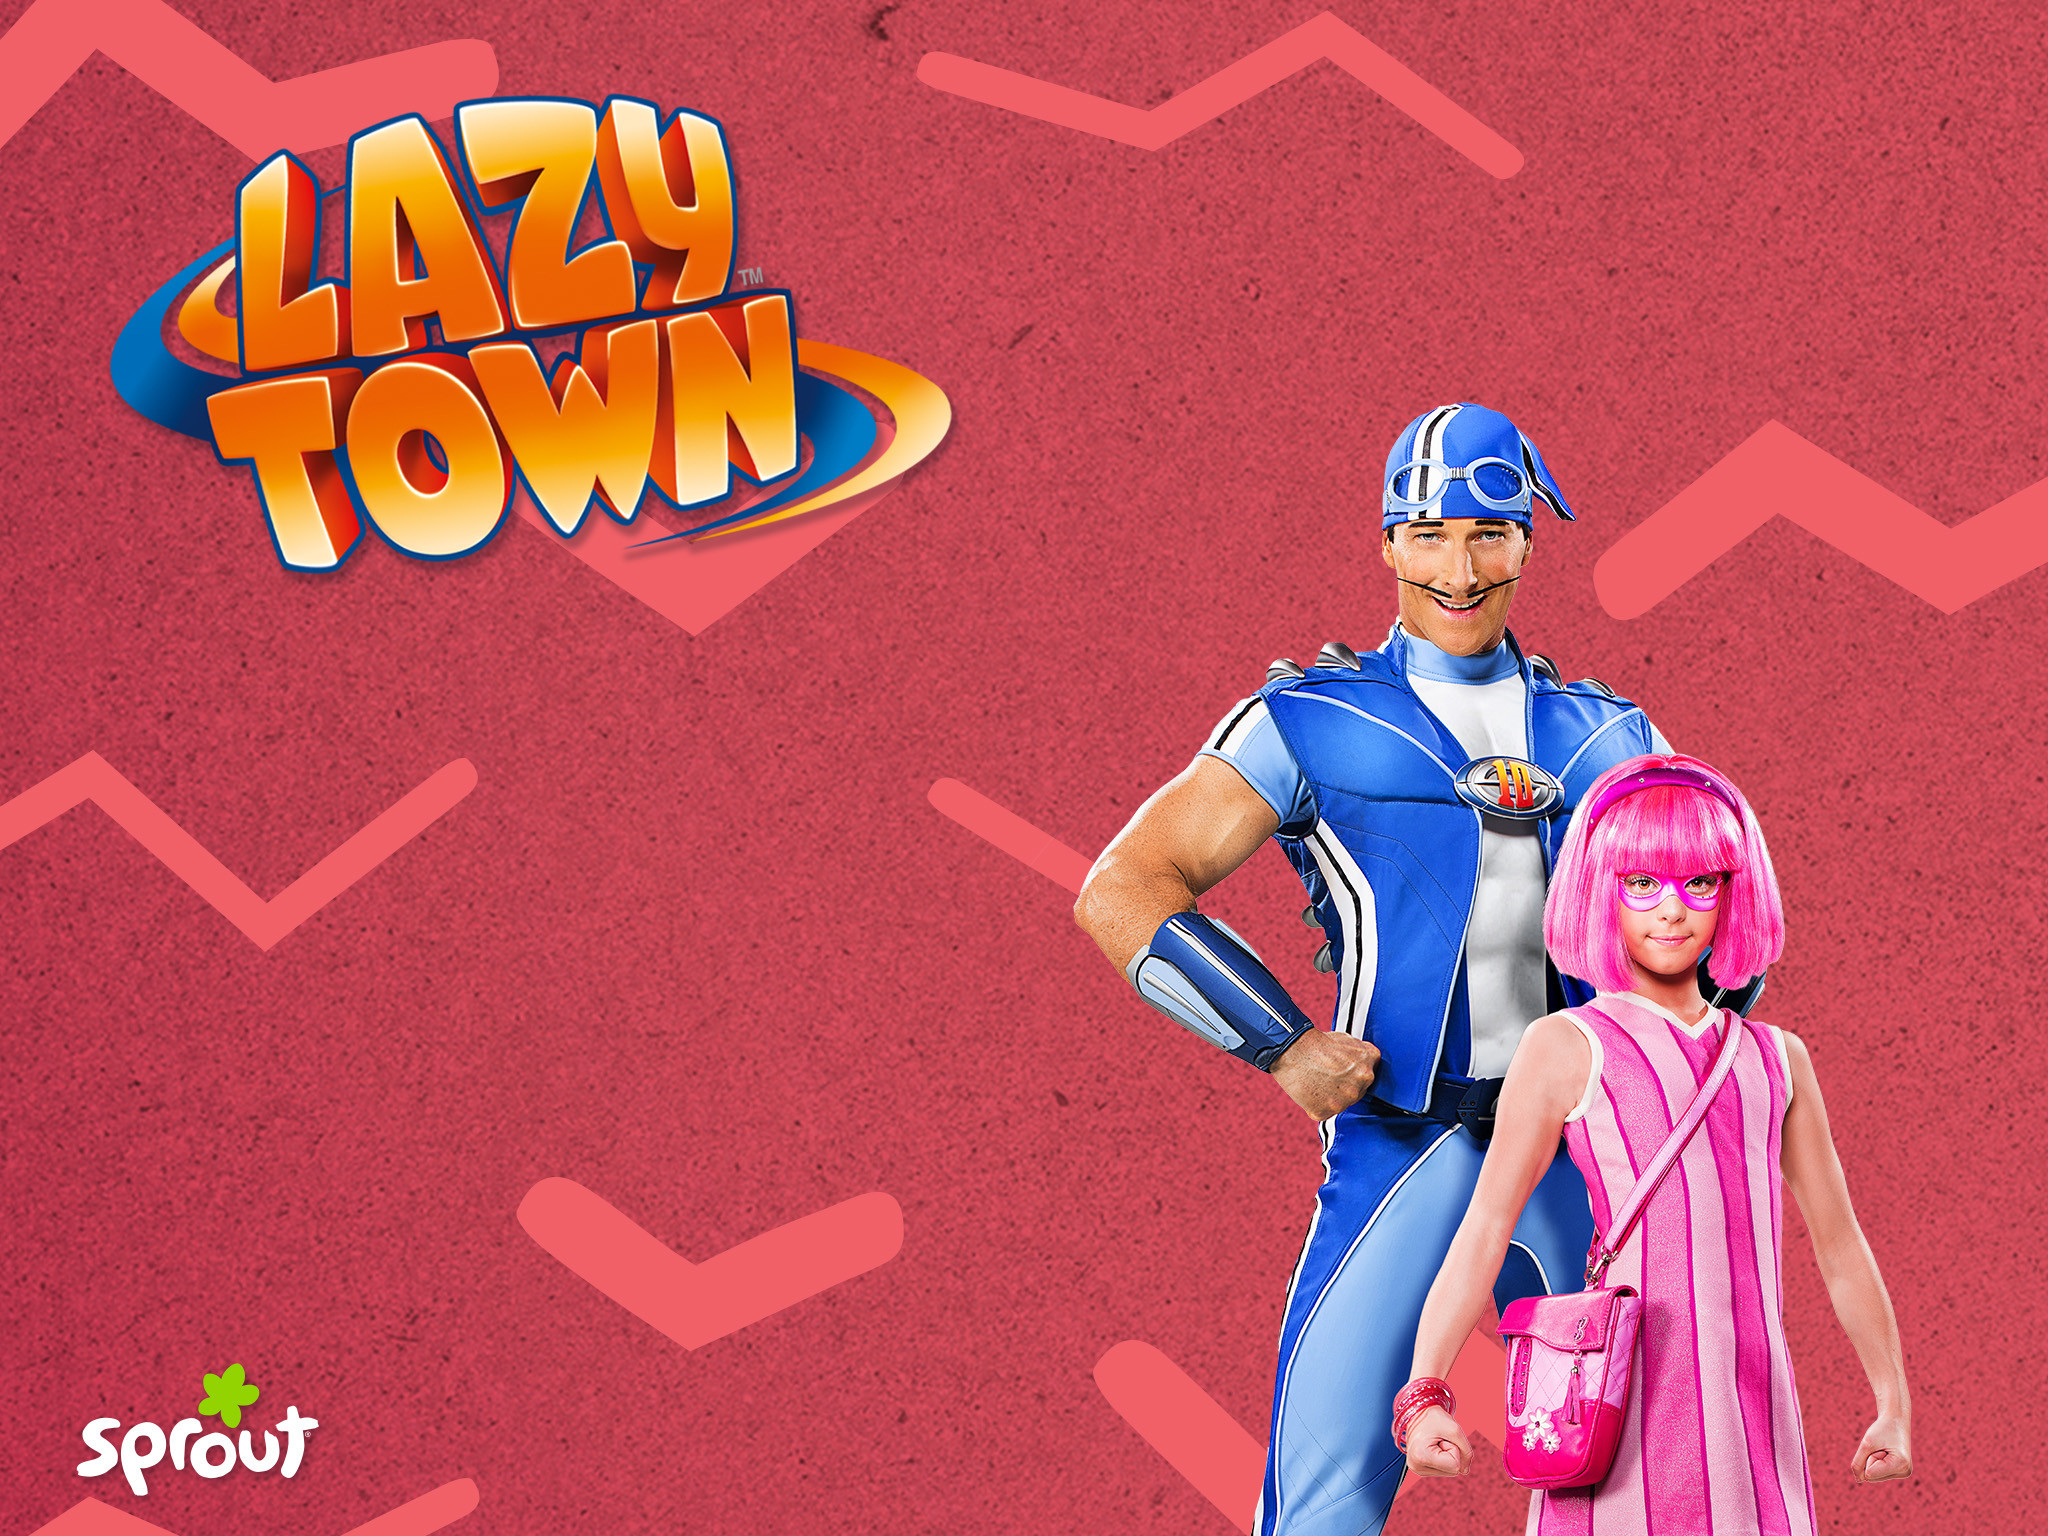 lazy town wallpaper,cartoon,adventure game,action figure,fictional character,hero